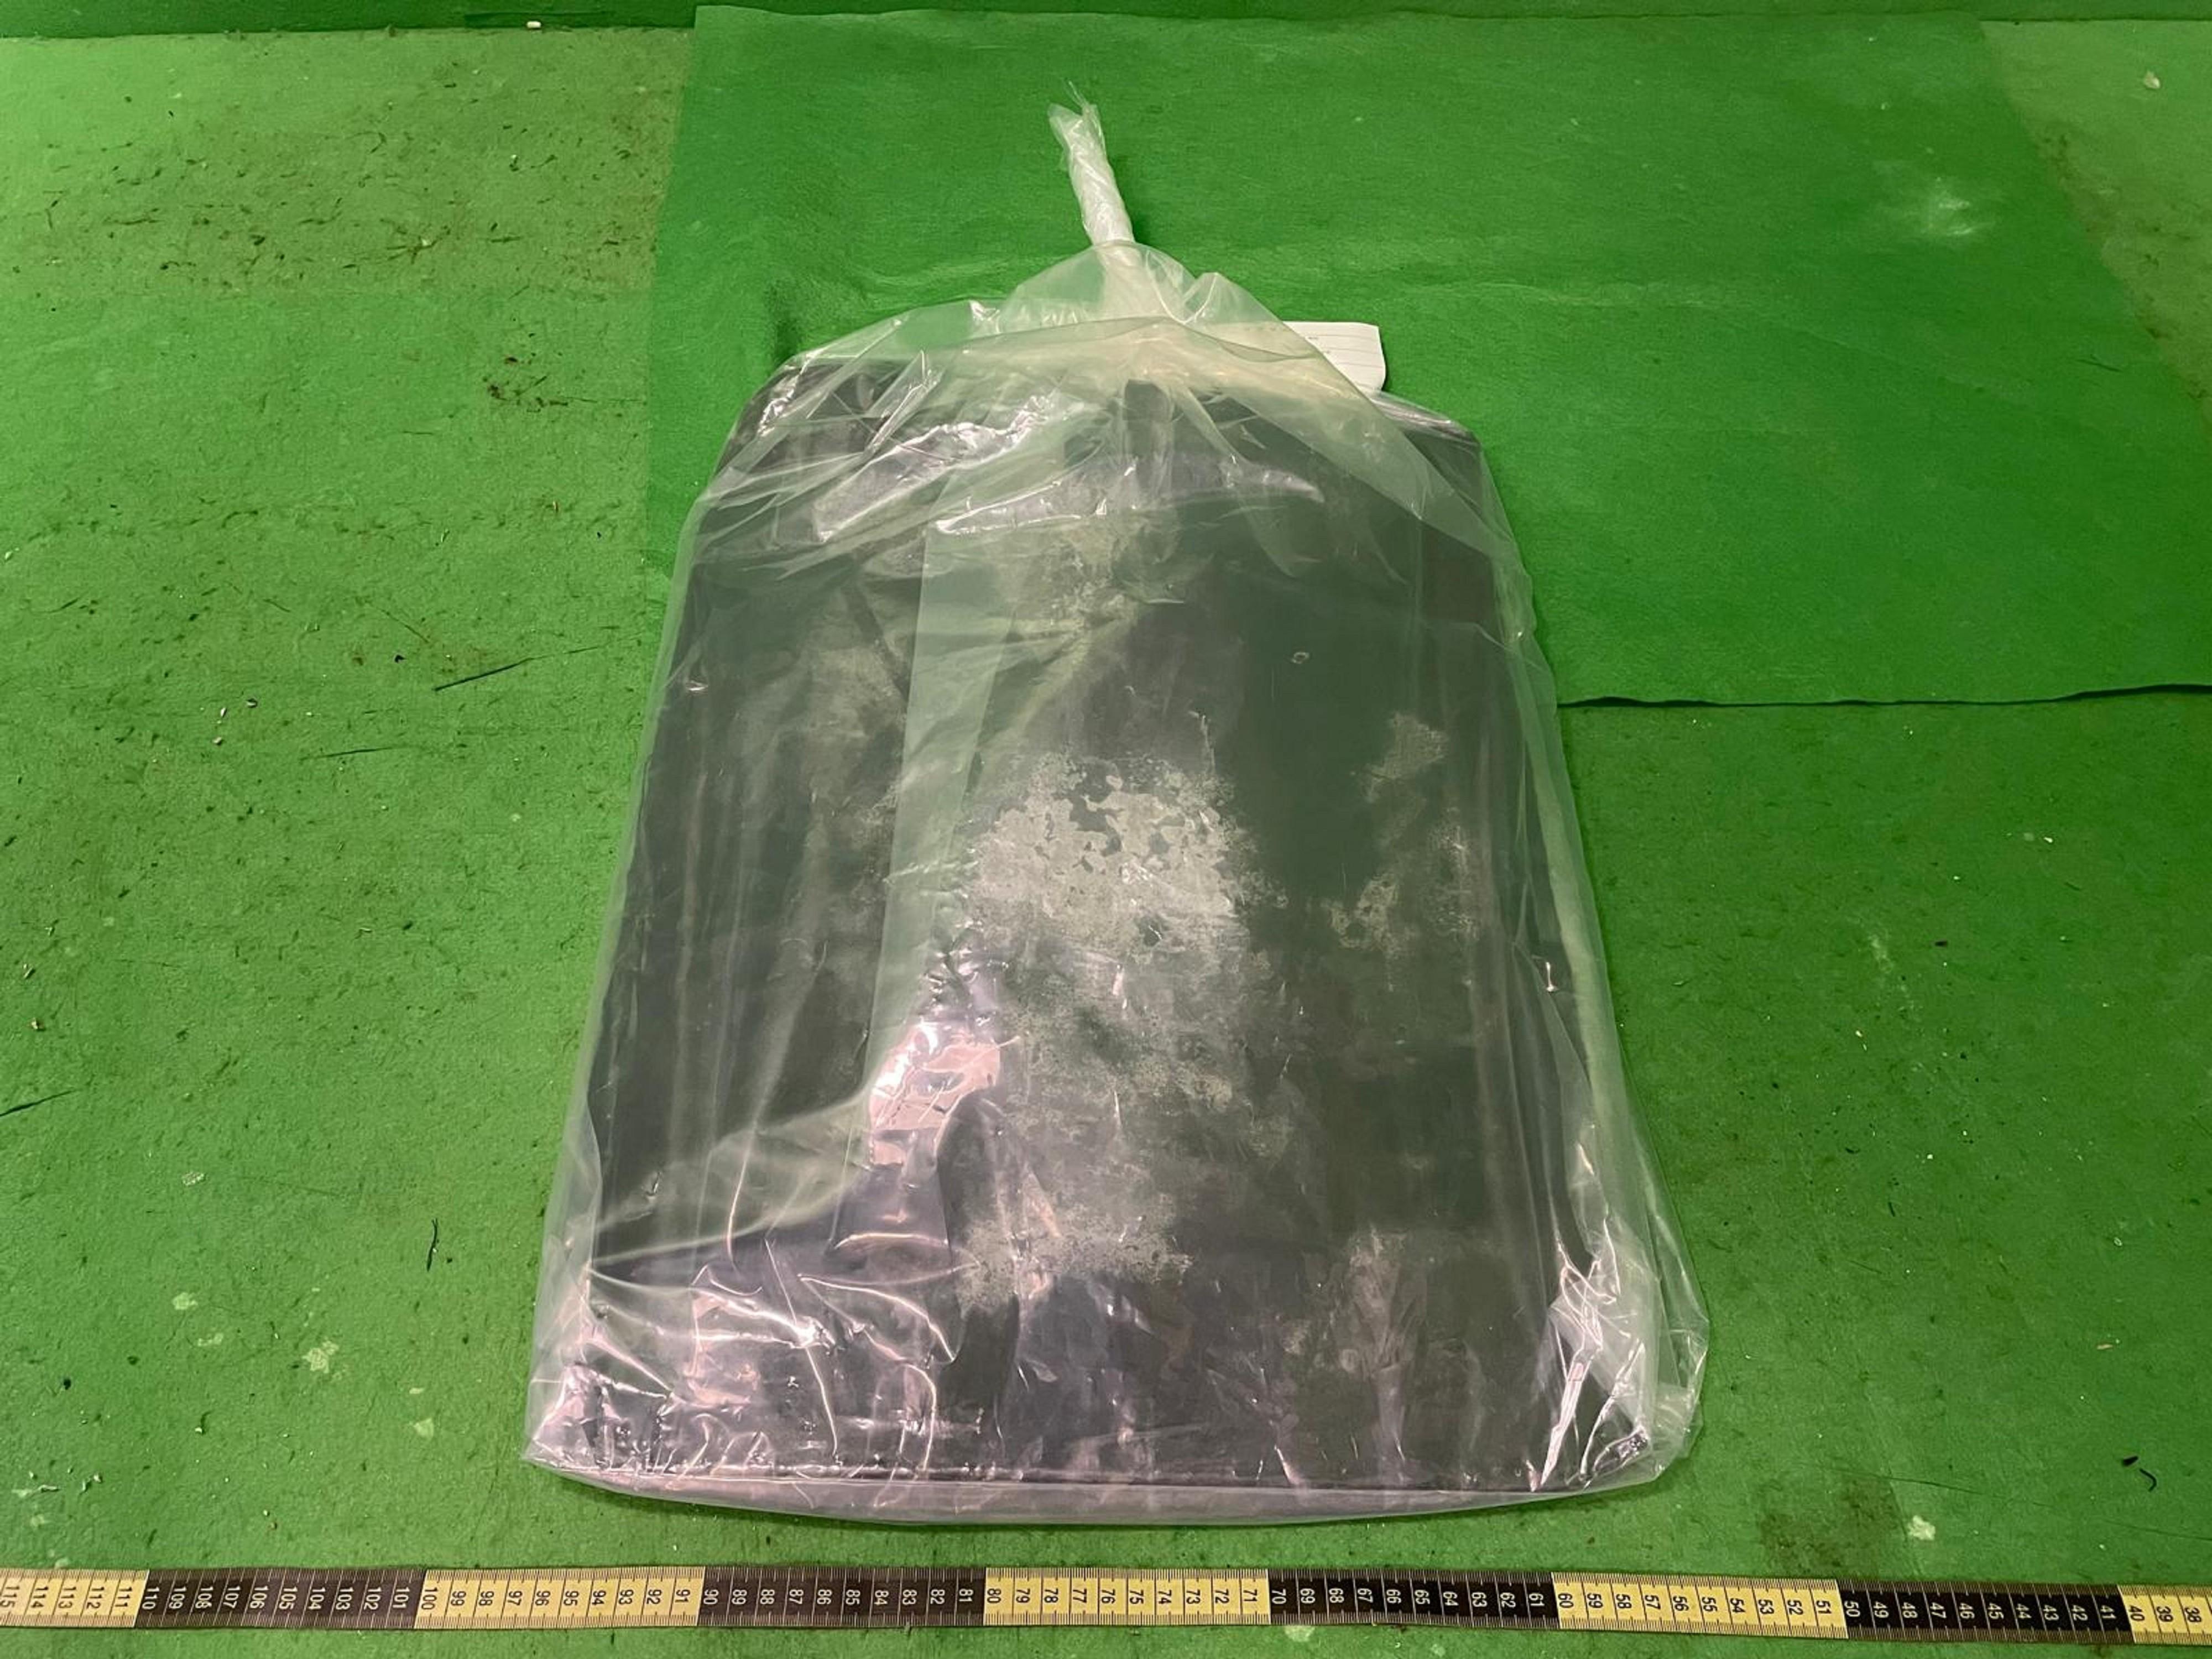 Hong Kong Customs yesterday (June 8) detected a passenger drug trafficking case at Hong Kong International Airport and seized about 1.7 kilograms of suspected cocaine with an estimated market value of about $2 million. Photo shows the suspected cocaine seized.